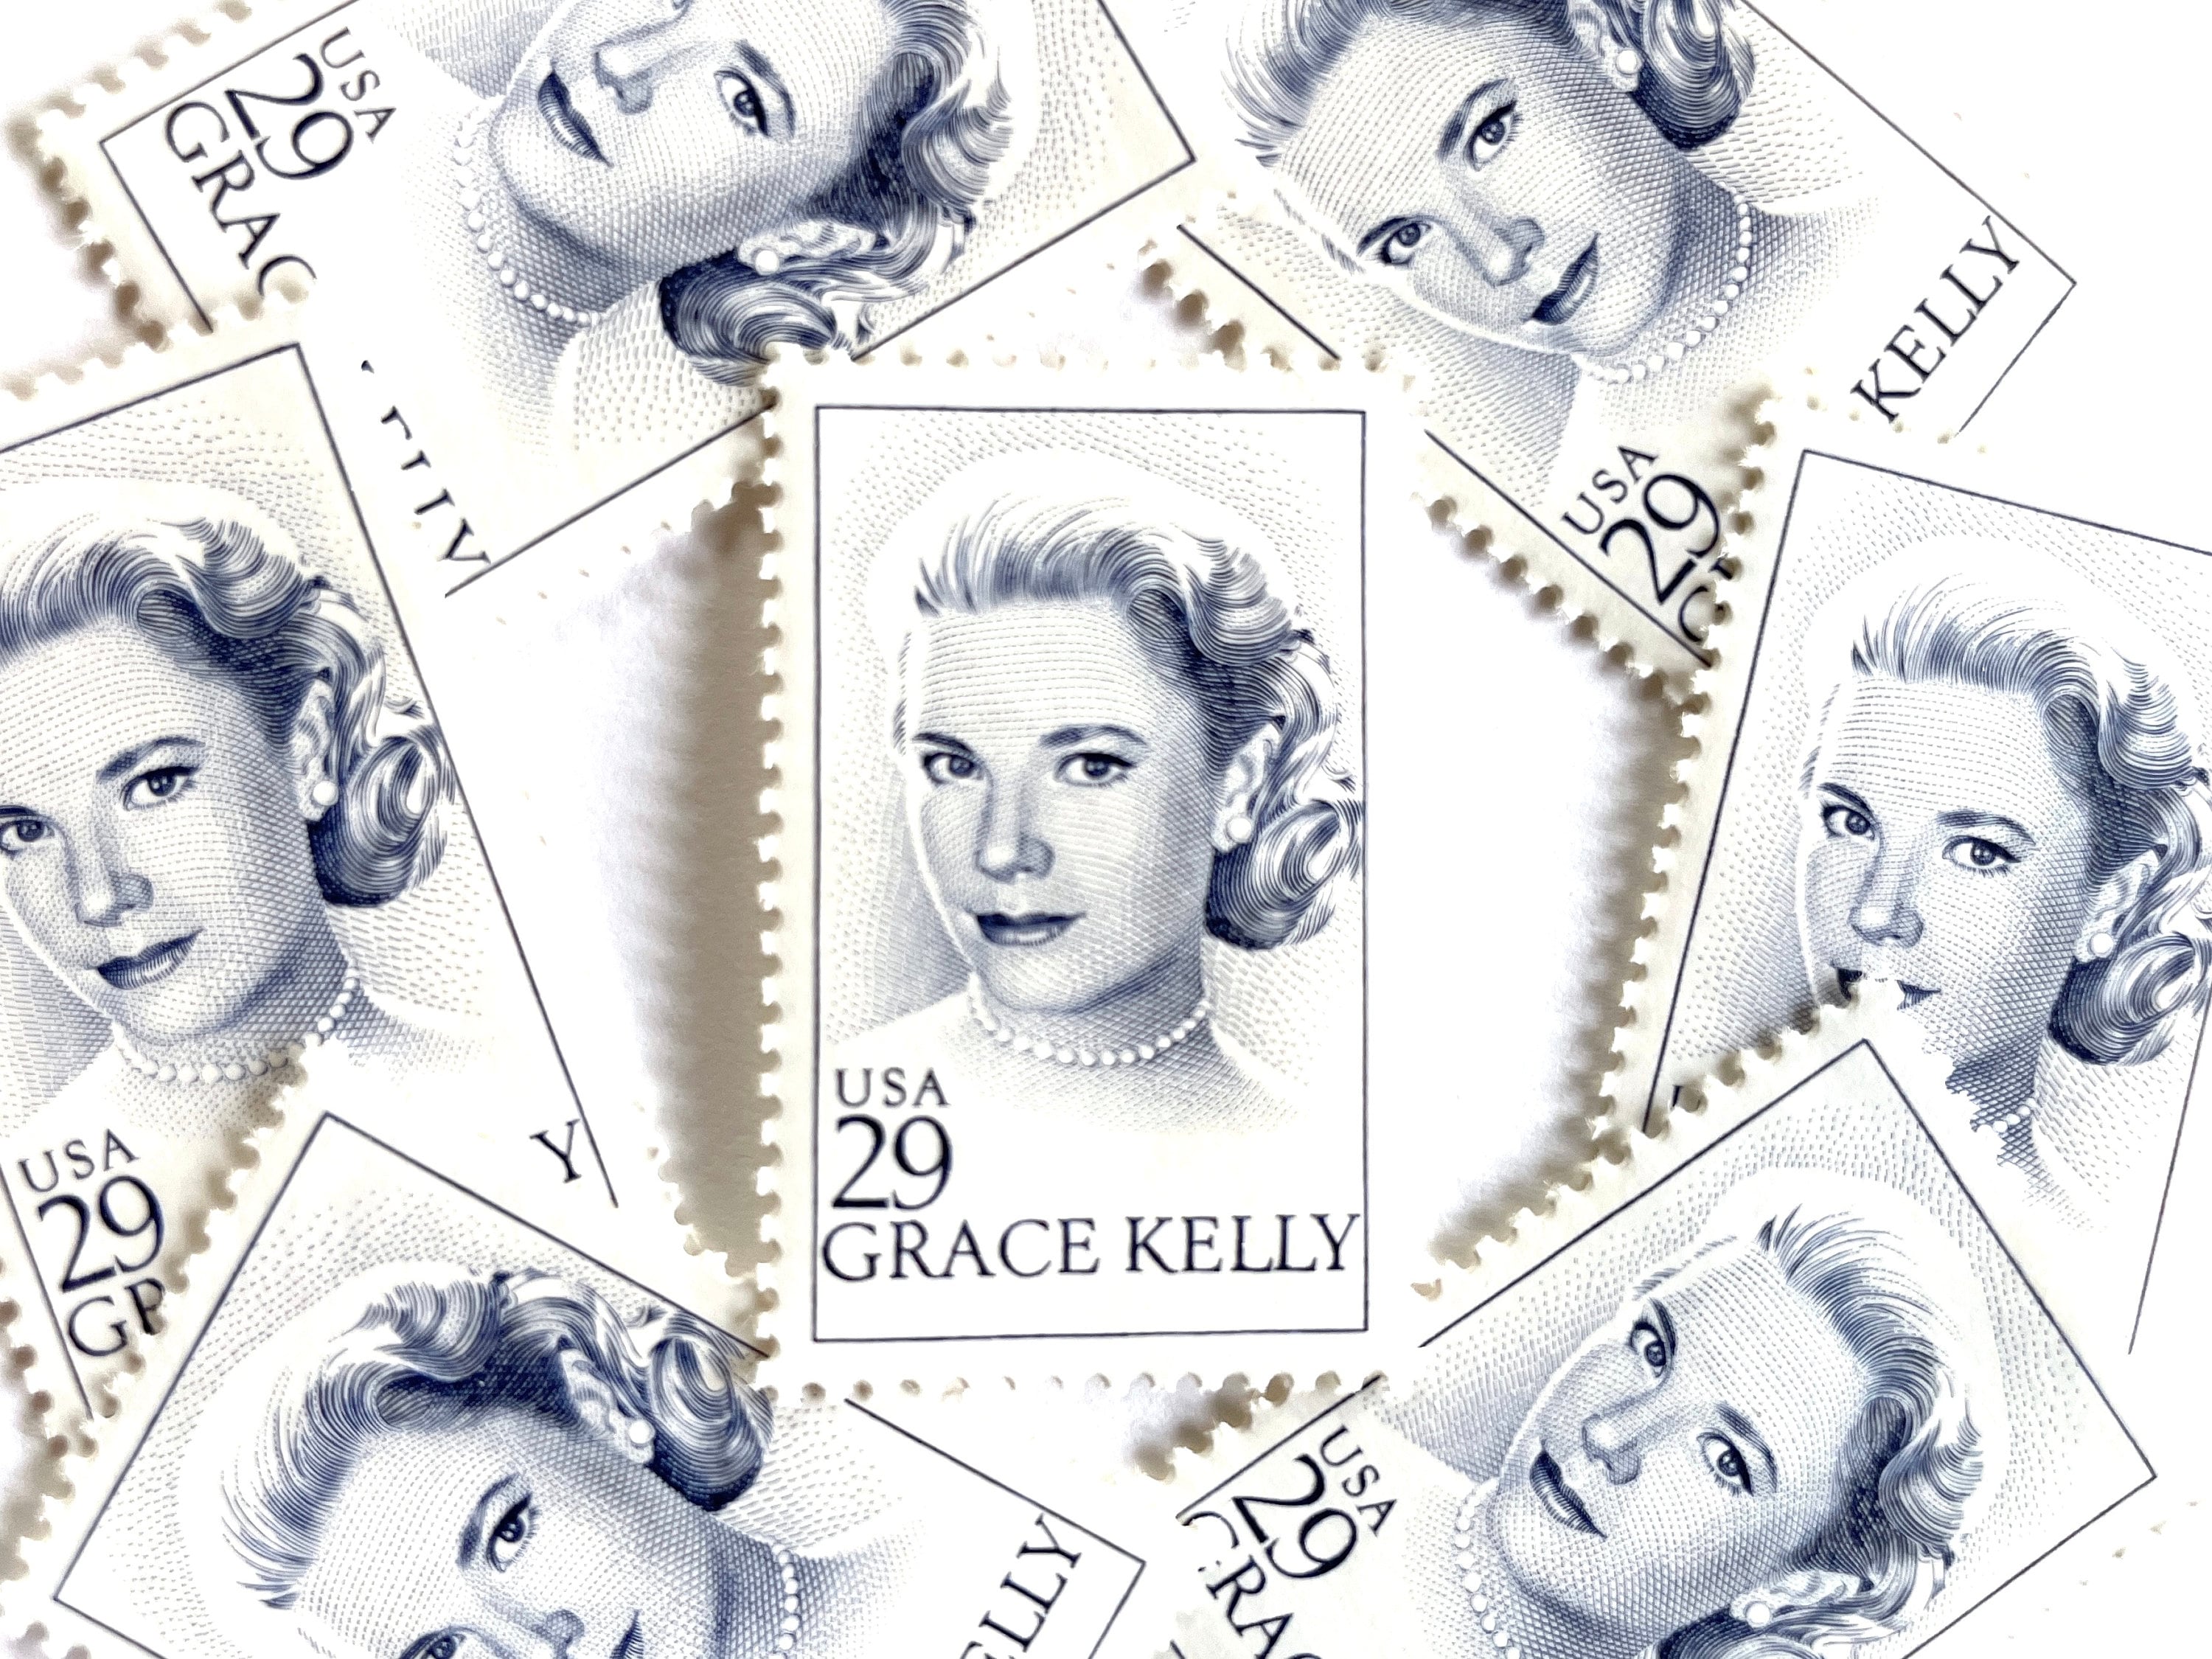 PRINCESS GRACE KELLY - U.S. & MONACO POSTAGE STAMPS - 1993 JOINT ISSUE -  MINT